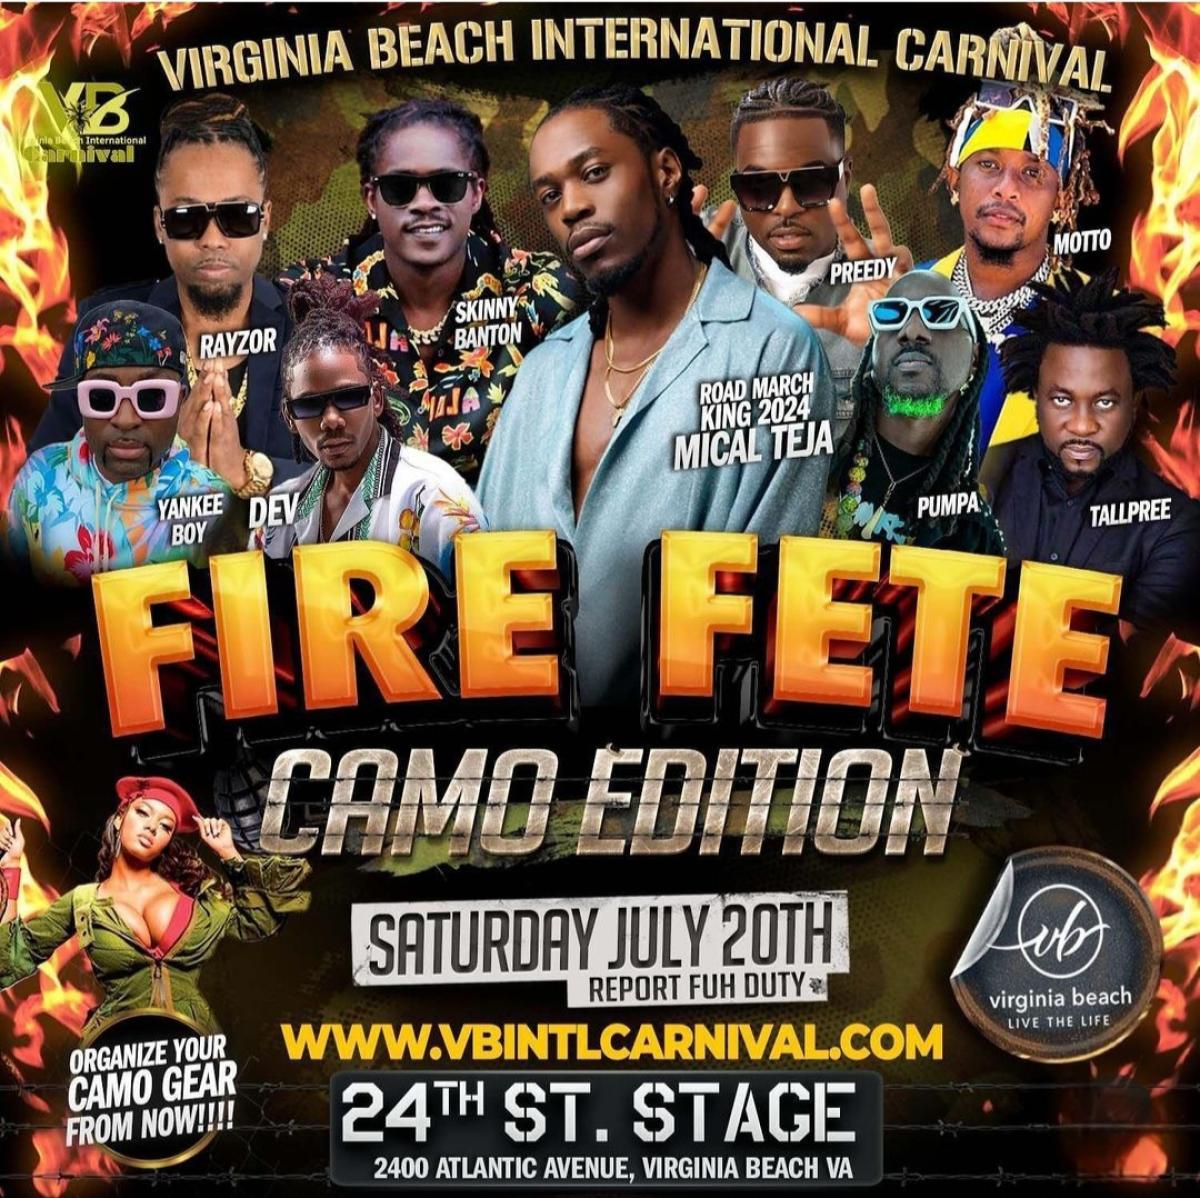 Fire Fete Camo Edition flyer or graphic.